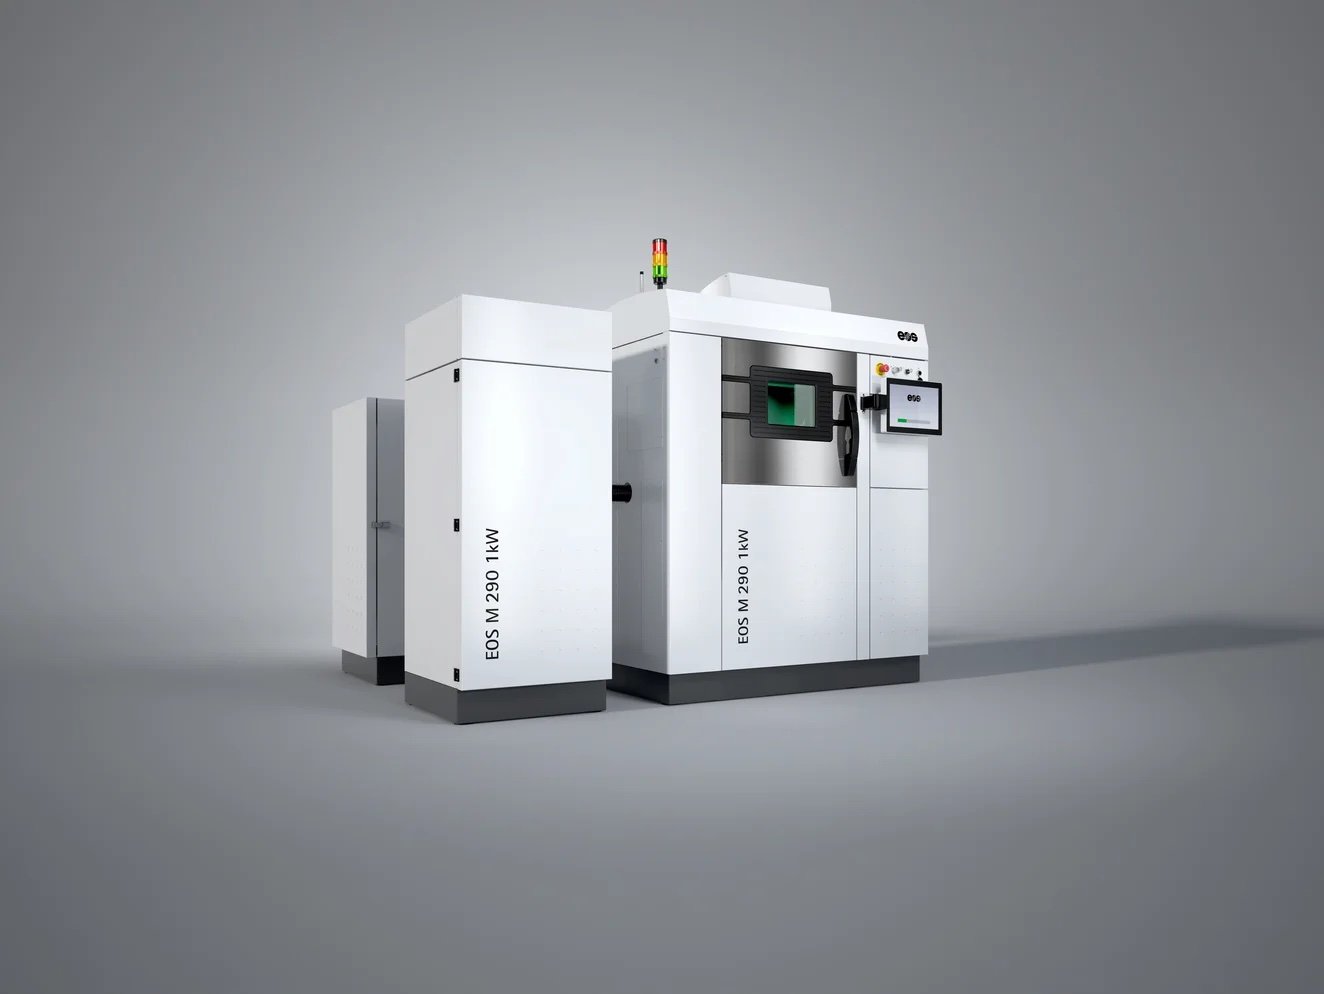 EOS enables series production with the new 1kW metal 3D printer M 290